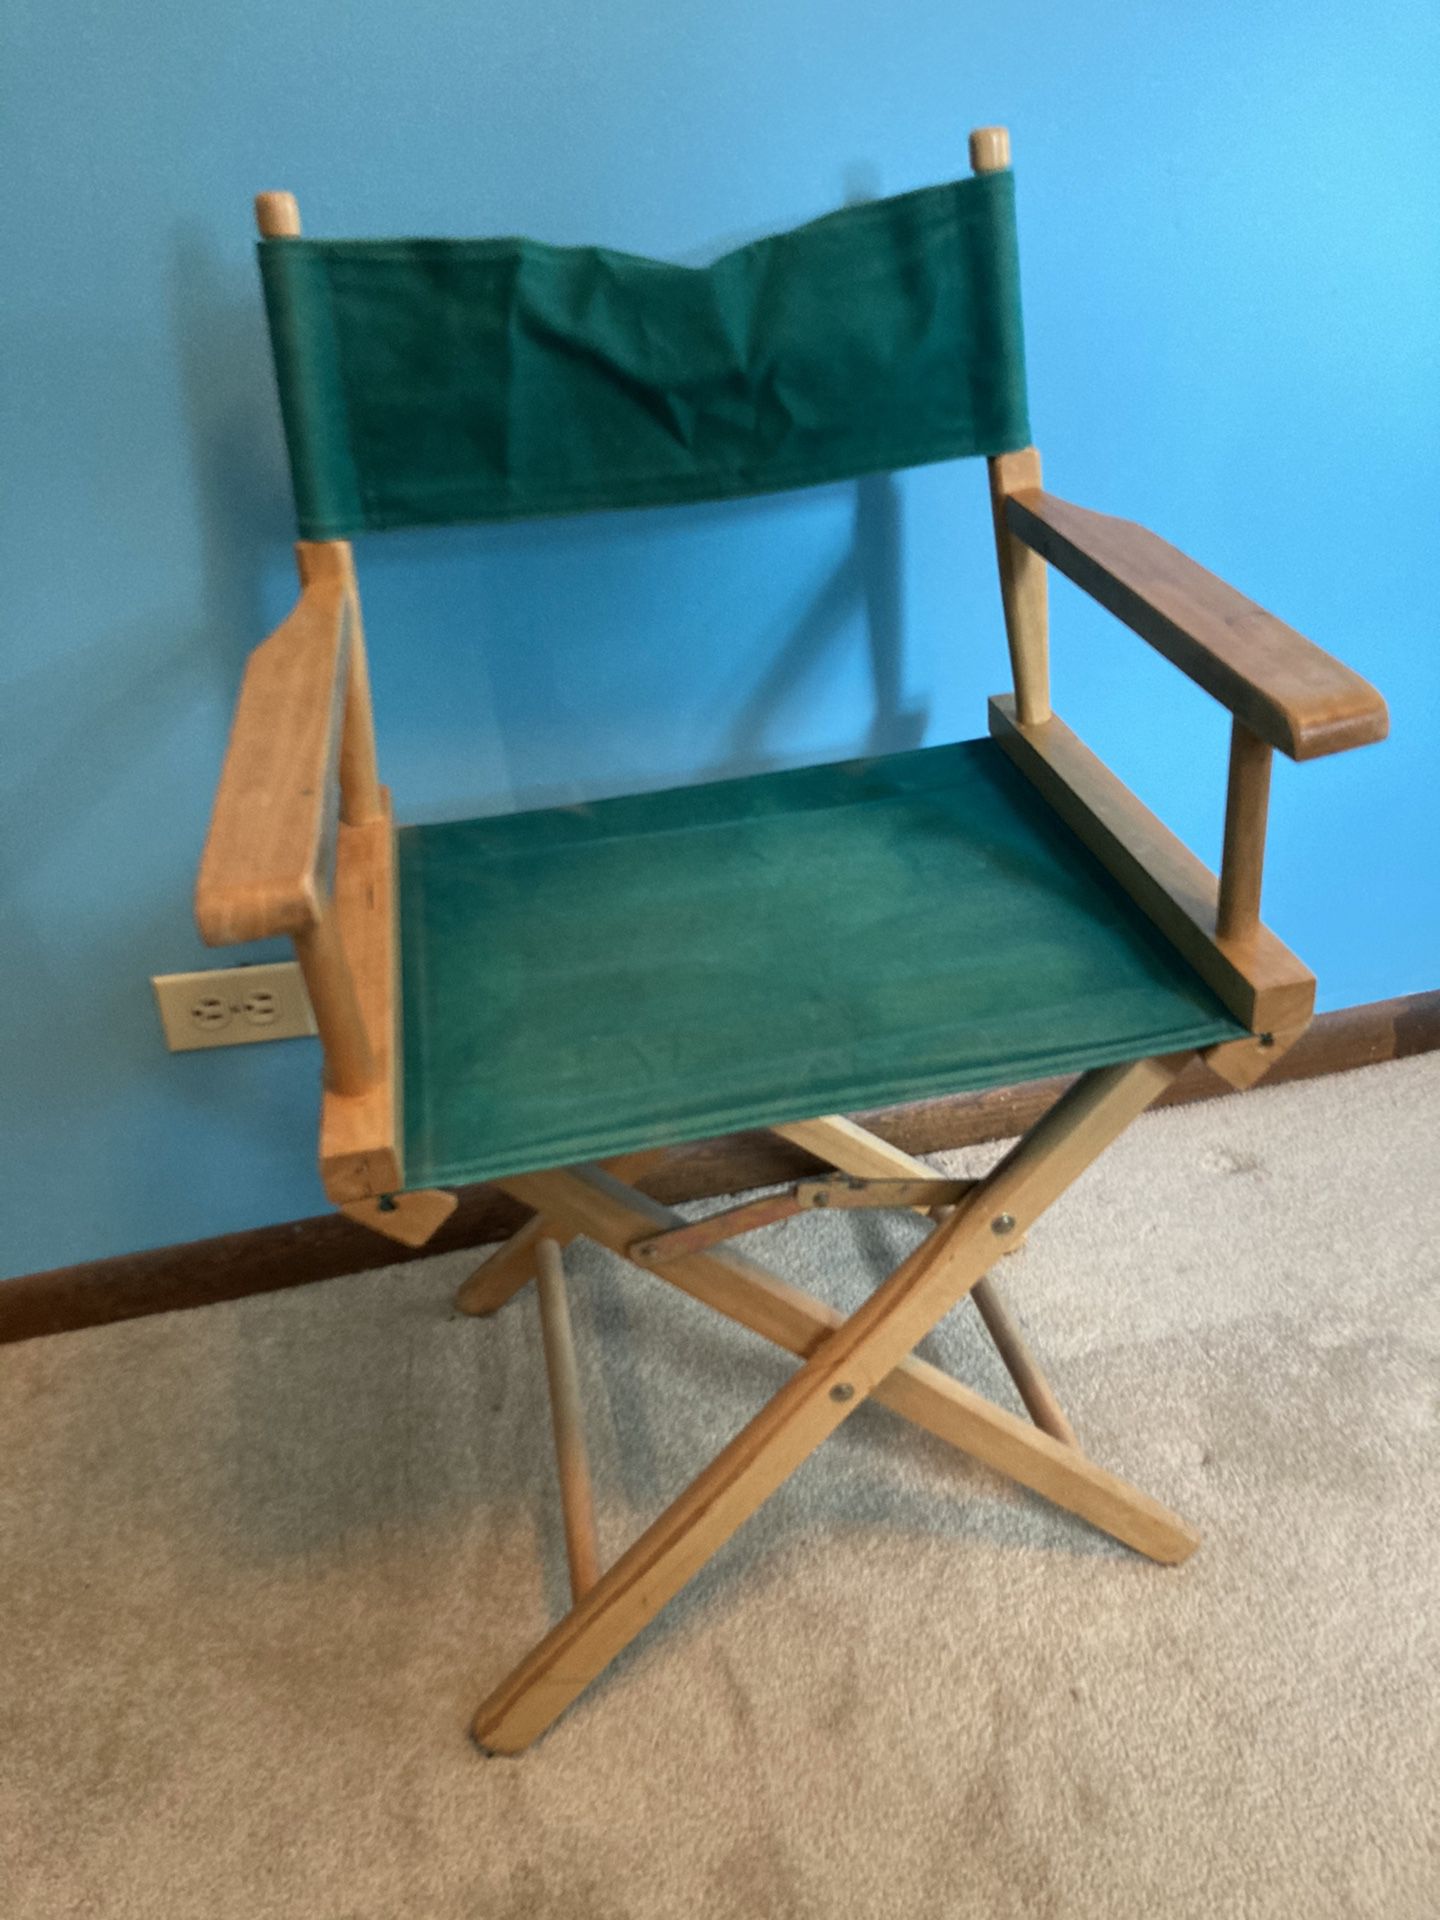 Collapsible Low To Ground Director Style Chair Turquoise Green  